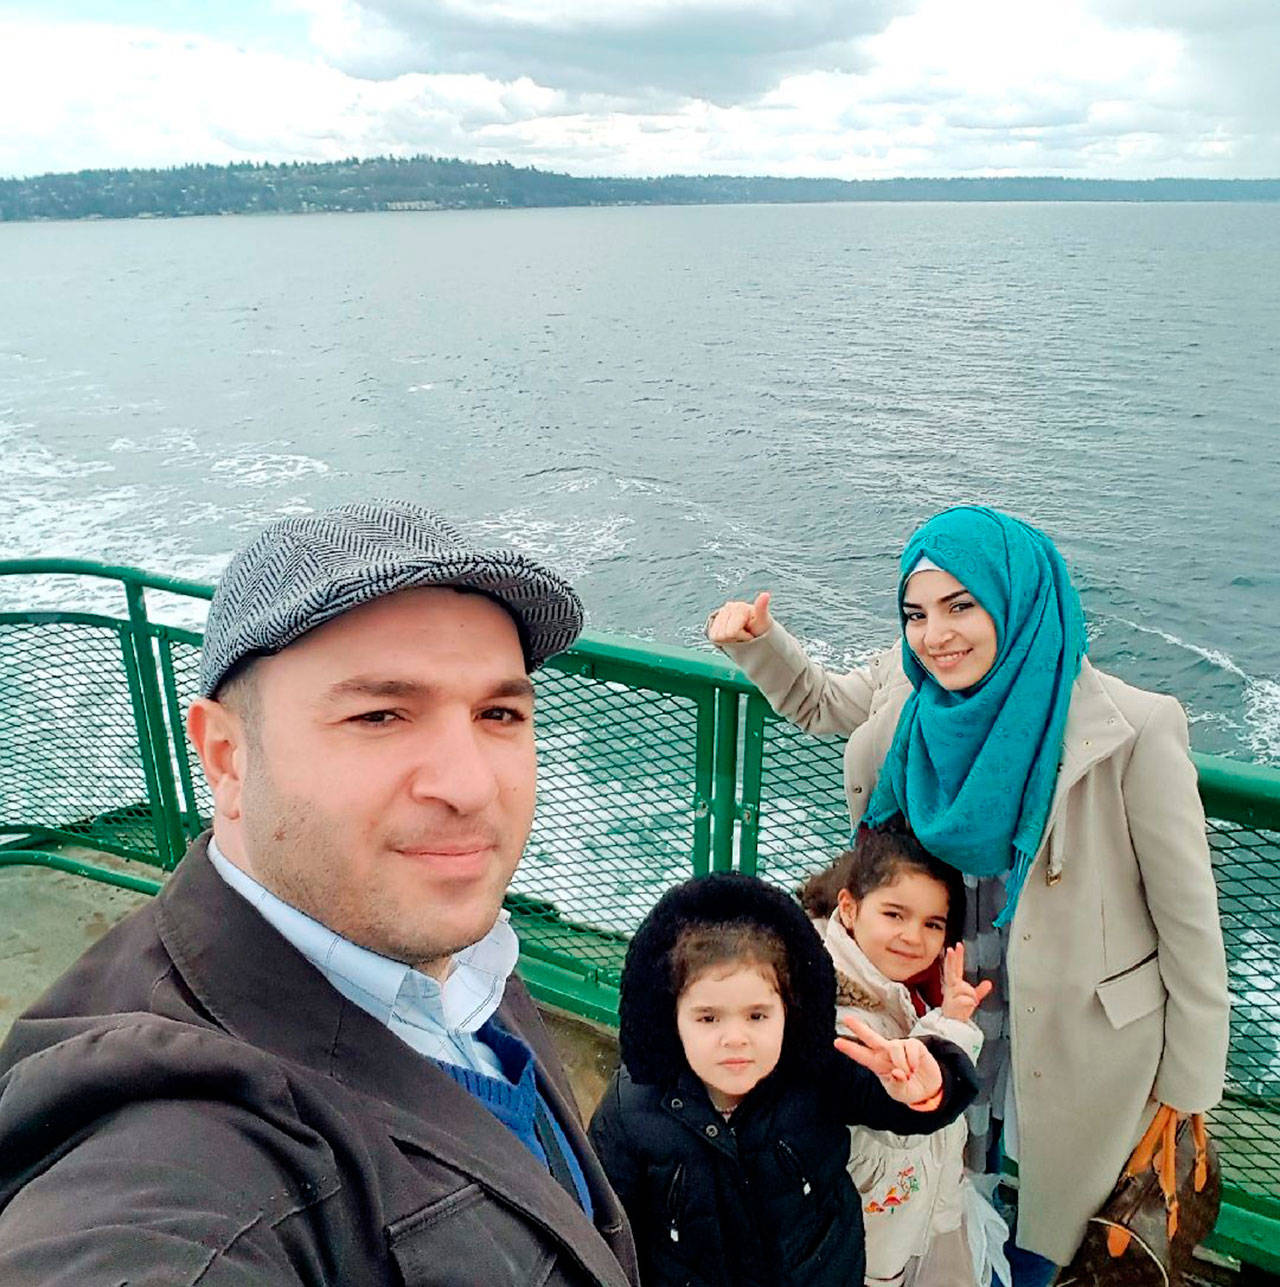 Iyad Alati, Safa Jneidi, and their daughters moved to Vashon in 2017 with assistance from the Vashon Resettlement Committee. The couple will host a pop-up show of Middle Eastern fashion and food on Saturday at the island home of Suzanna Leigh (Courtesy Photo).